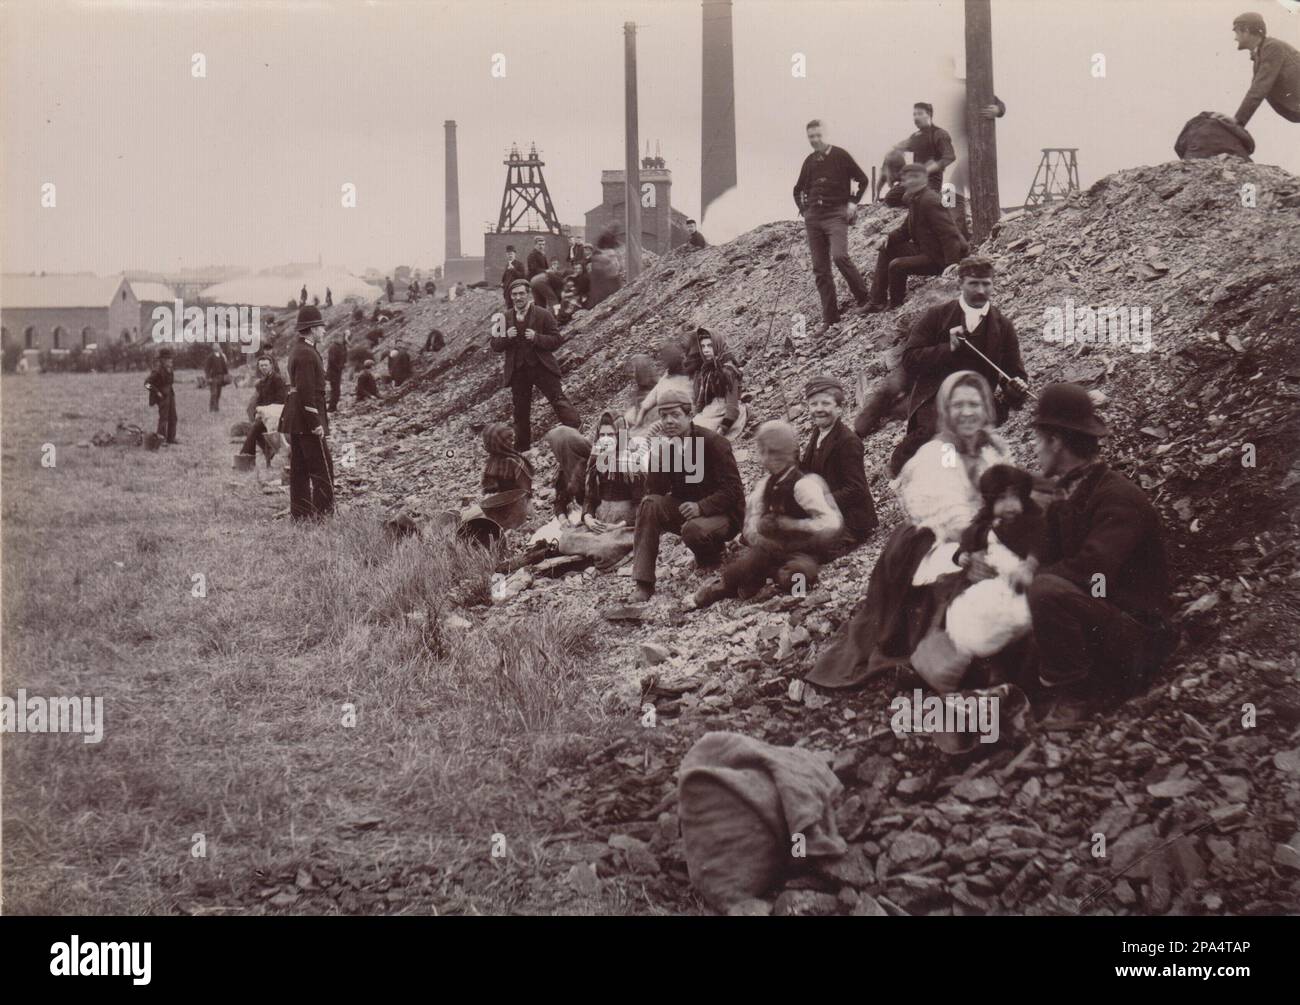 Families picking coal from a colliery soil heap. The early 20th century photograph shows men, women and children sorting through the waste material produced by the mine looking for coal to take home for fuel. Colliery buildings can be seen in the background, including a chimney and pit wheel. A policeman is watching the pickers. The photograph is likely to have been taken during one of the early 20th century miners strikes Stock Photo